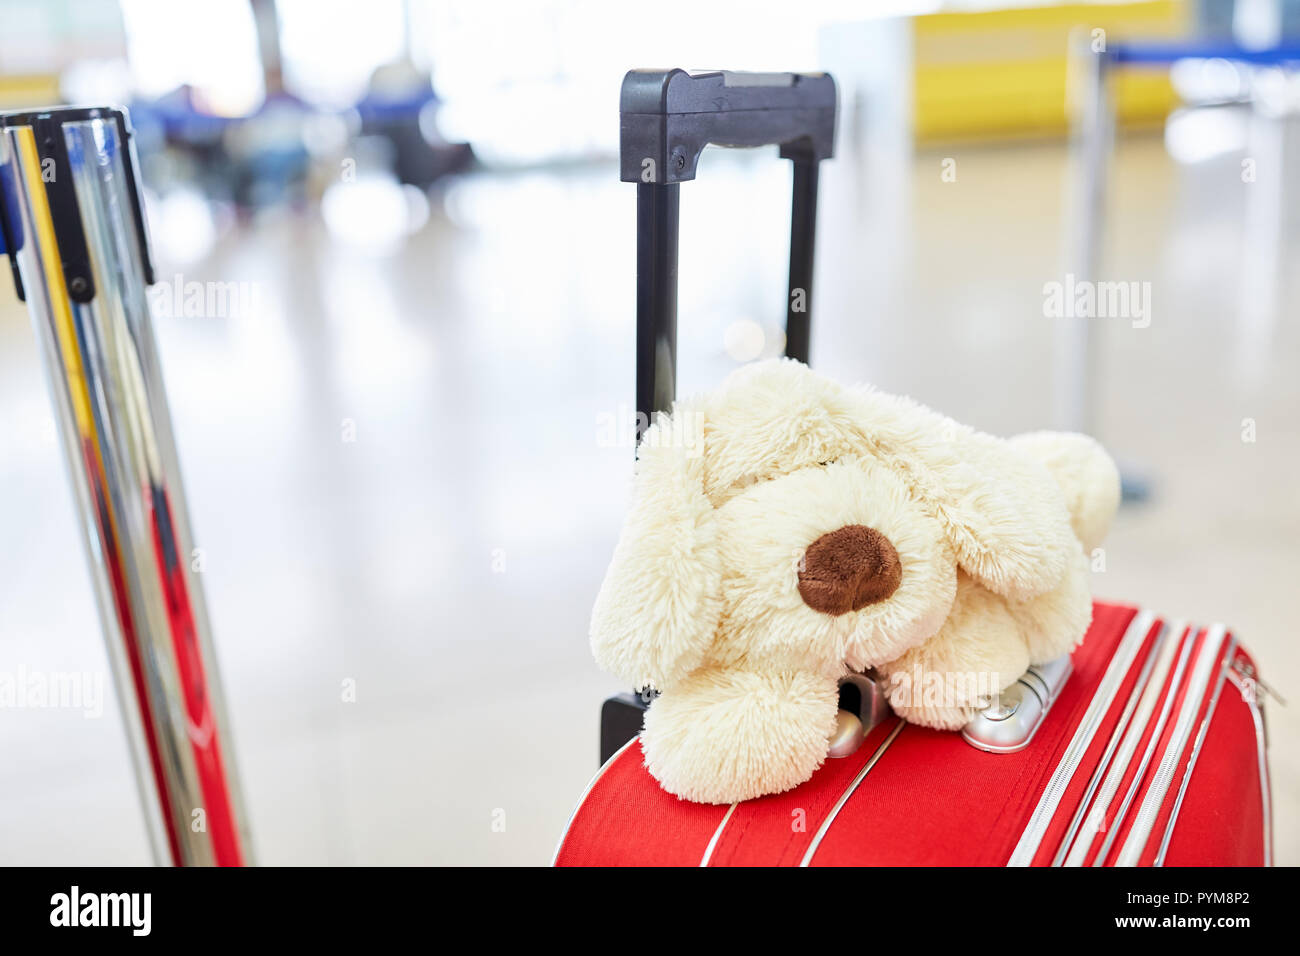 A cuddly toy lies on a wheeled suitcase in the airport terminal Stock Photo